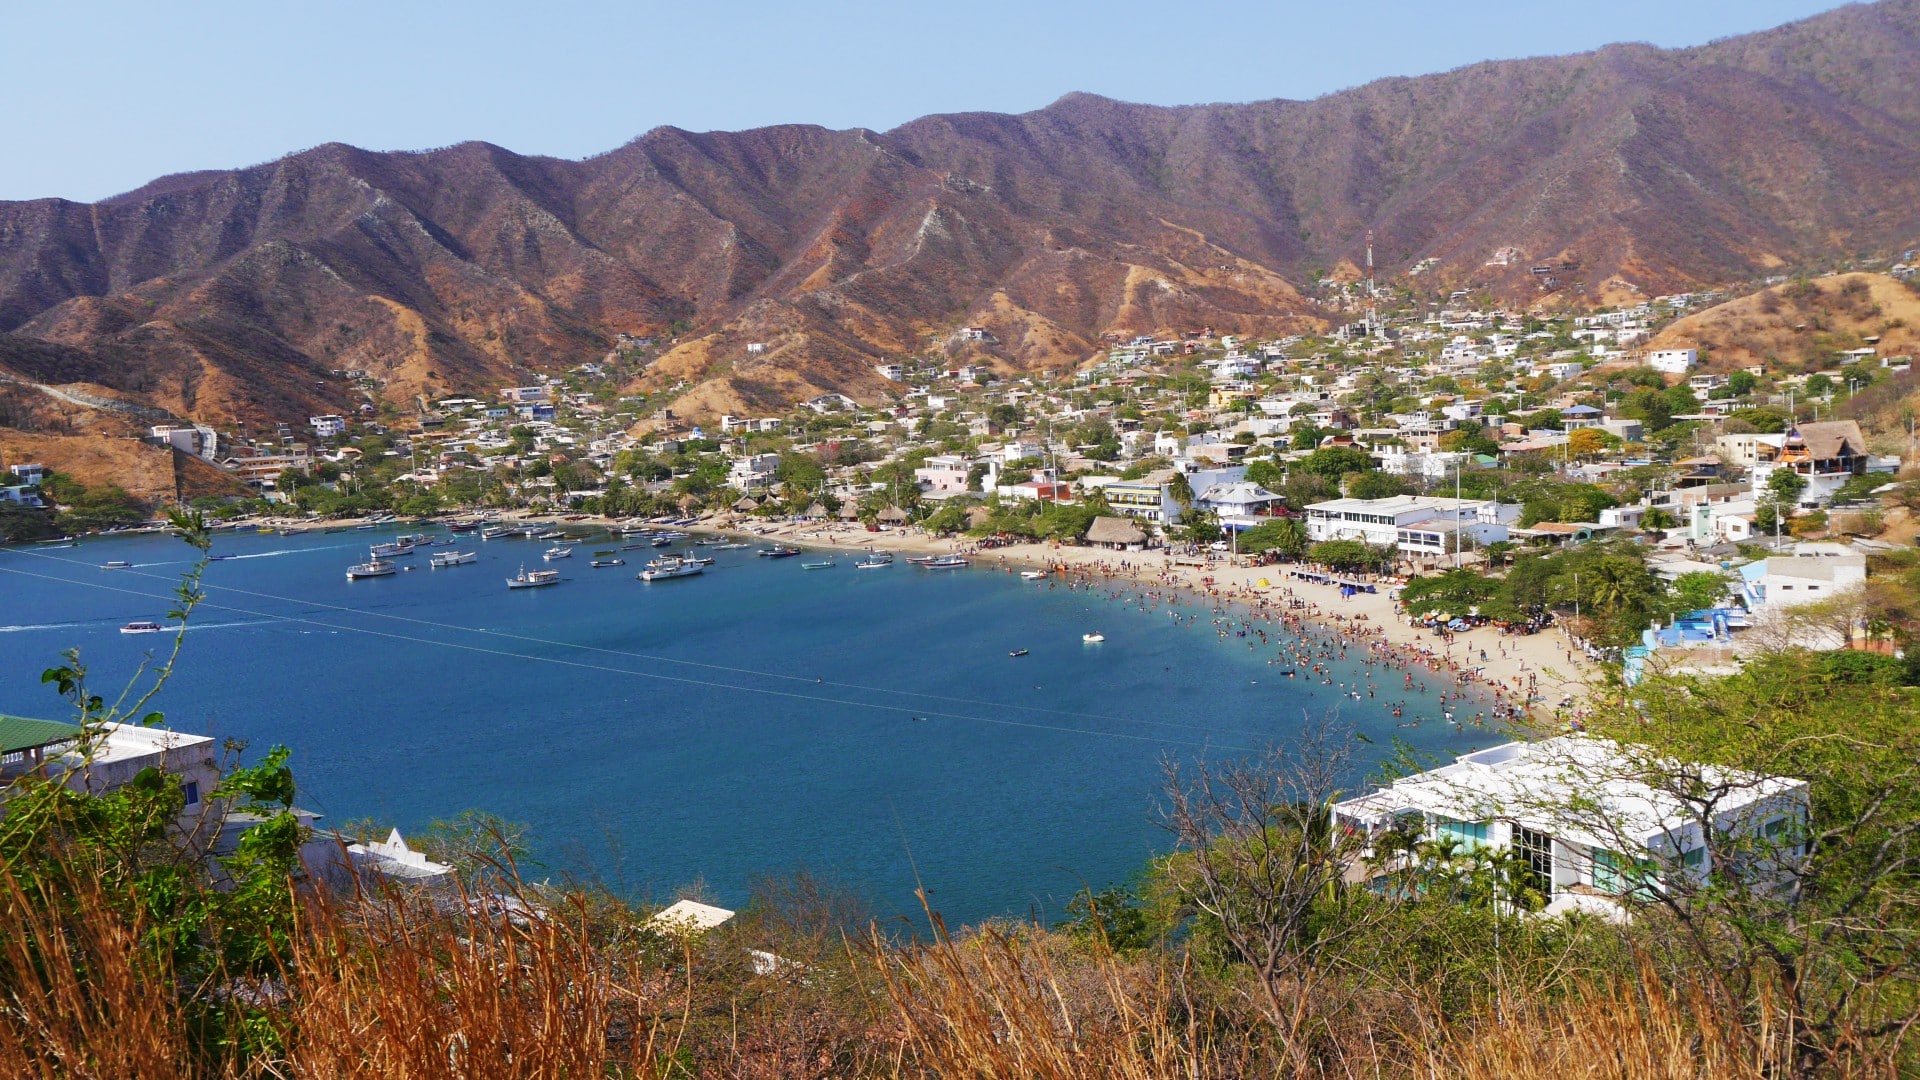 Located north of Santa Marta, Taganga is a former fishing village with a great beach and lots of budget and mid-range accommodations